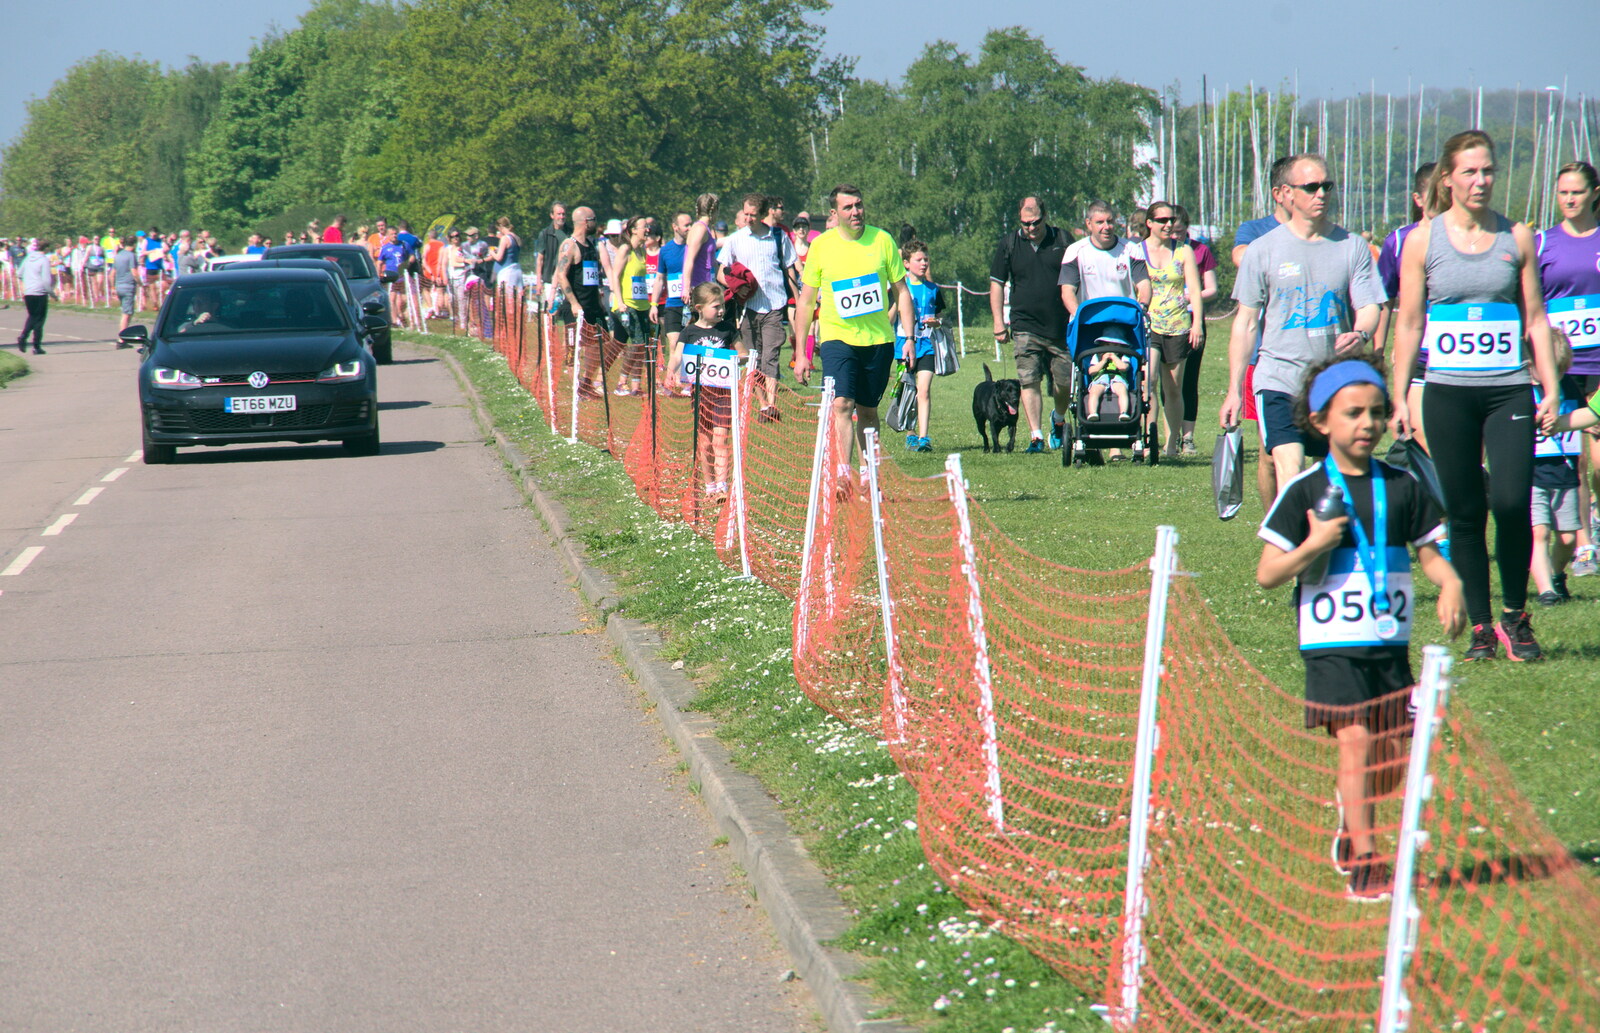 A stream of people heads down to registration from Isobel's 10km Run, Alton Water, Stutton, Suffolk - 6th May 2018